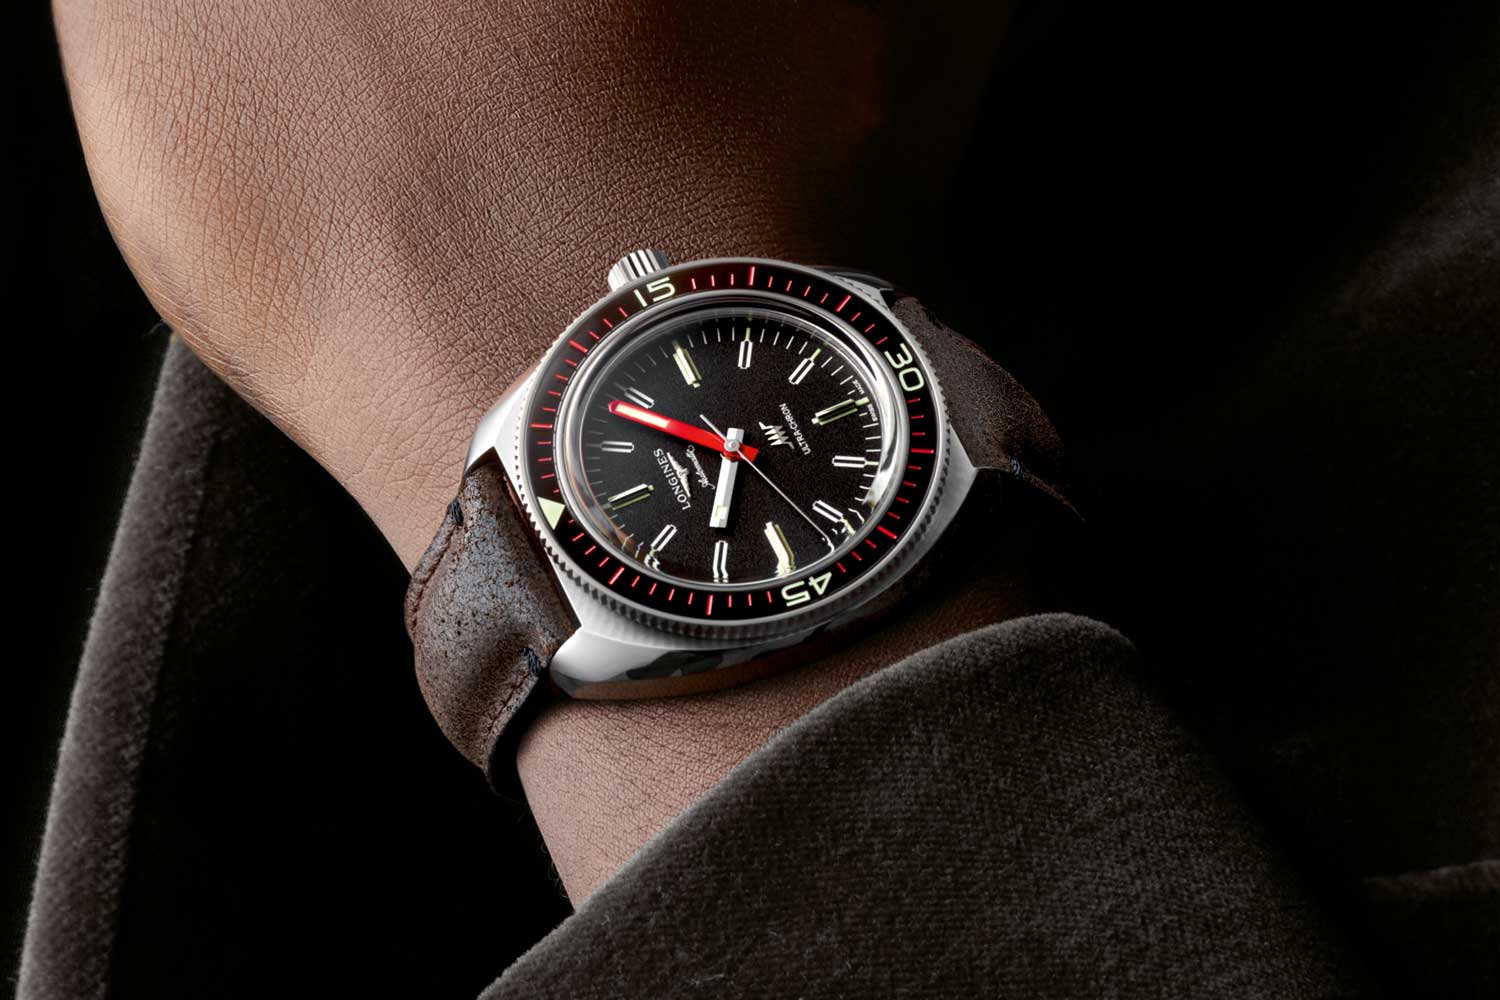 Ultra-Chron offers a penchant for vintage watch appeal and modern technological advances